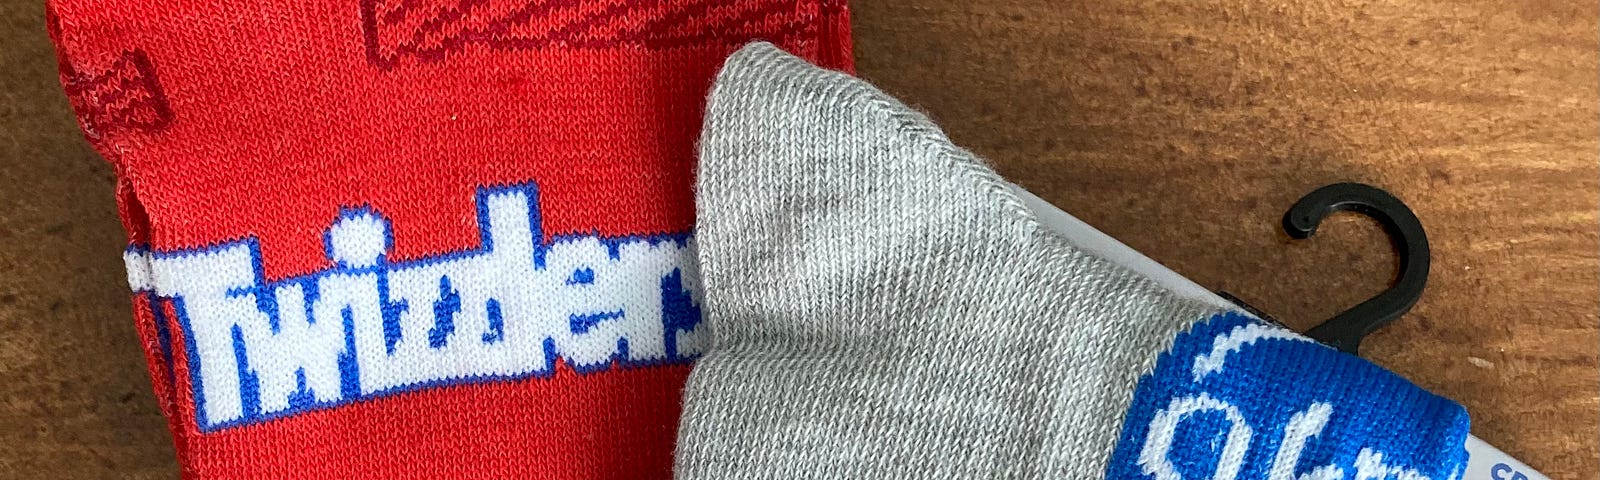 a photo of two pairs of crew socks, a red pair with the Twizzlers logo and a gray pair with the York logo